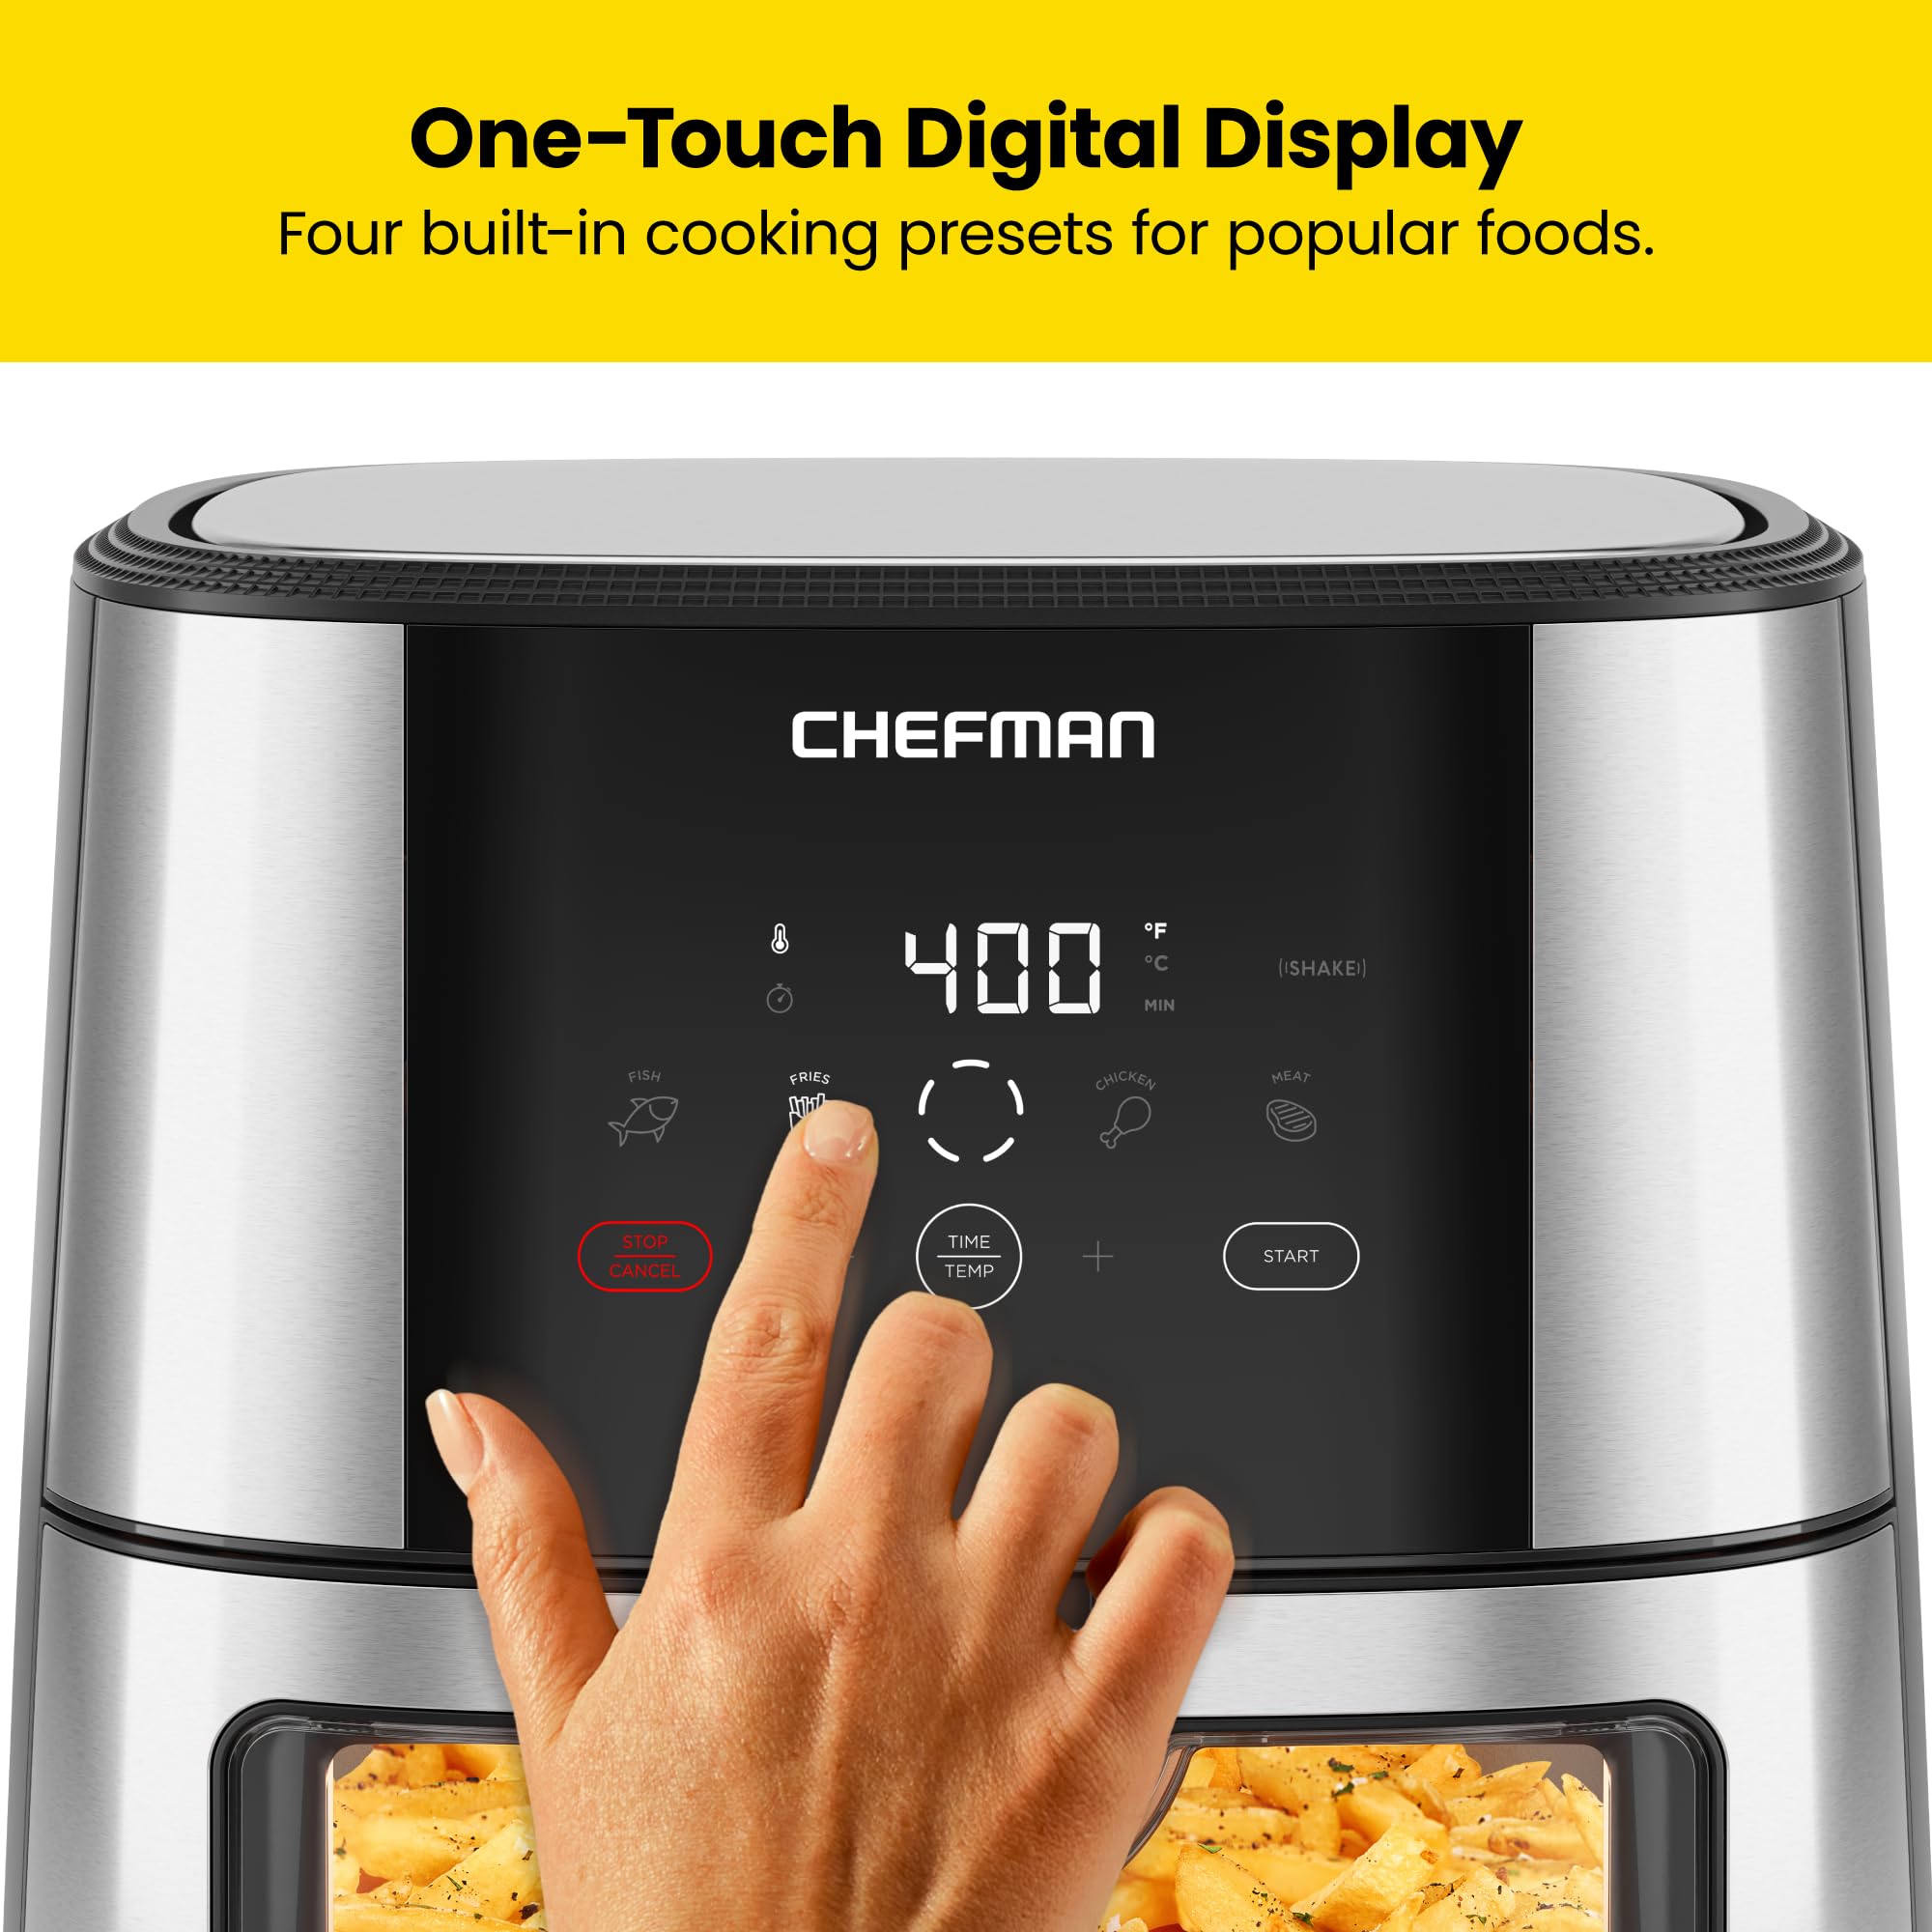 CHEFMAN Easy-View Air Fryer – 8 Qt Family Size with Viewing Window, One-Touch Digital Control with 4 Presets, Nonstick & Dishwasher Safe, Broil, Roast, Dehydrate, Bake, Auto-Shutoff, Stainless Steel